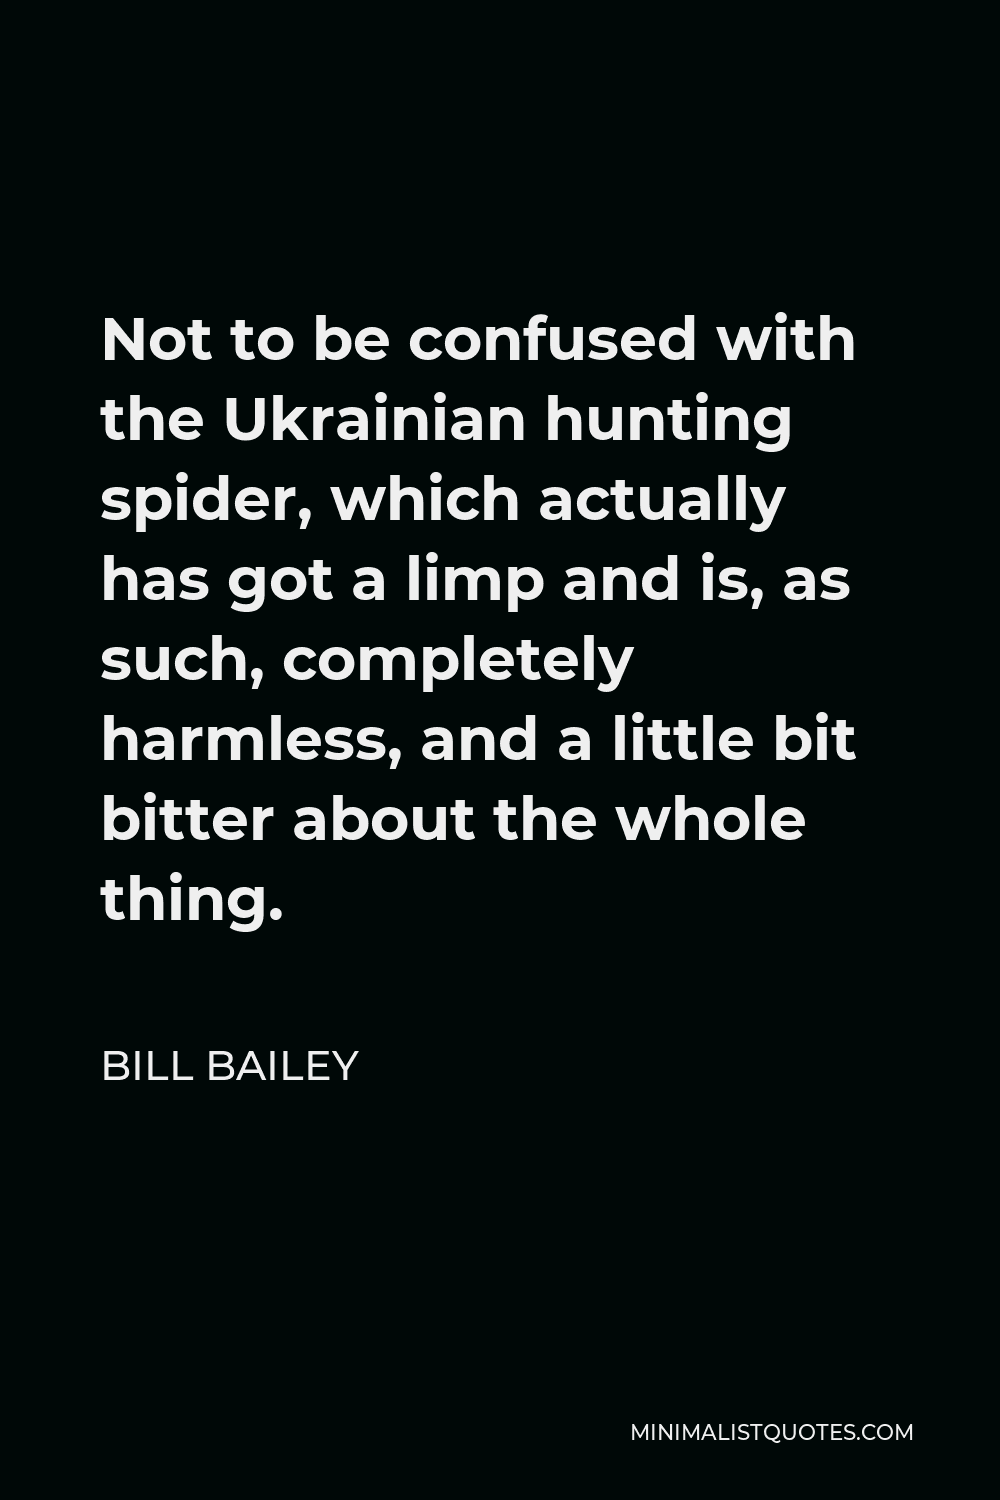 Bill Bailey Quote - Not to be confused with the Ukrainian hunting spider, which actually has got a limp and is, as such, completely harmless, and a little bit bitter about the whole thing.